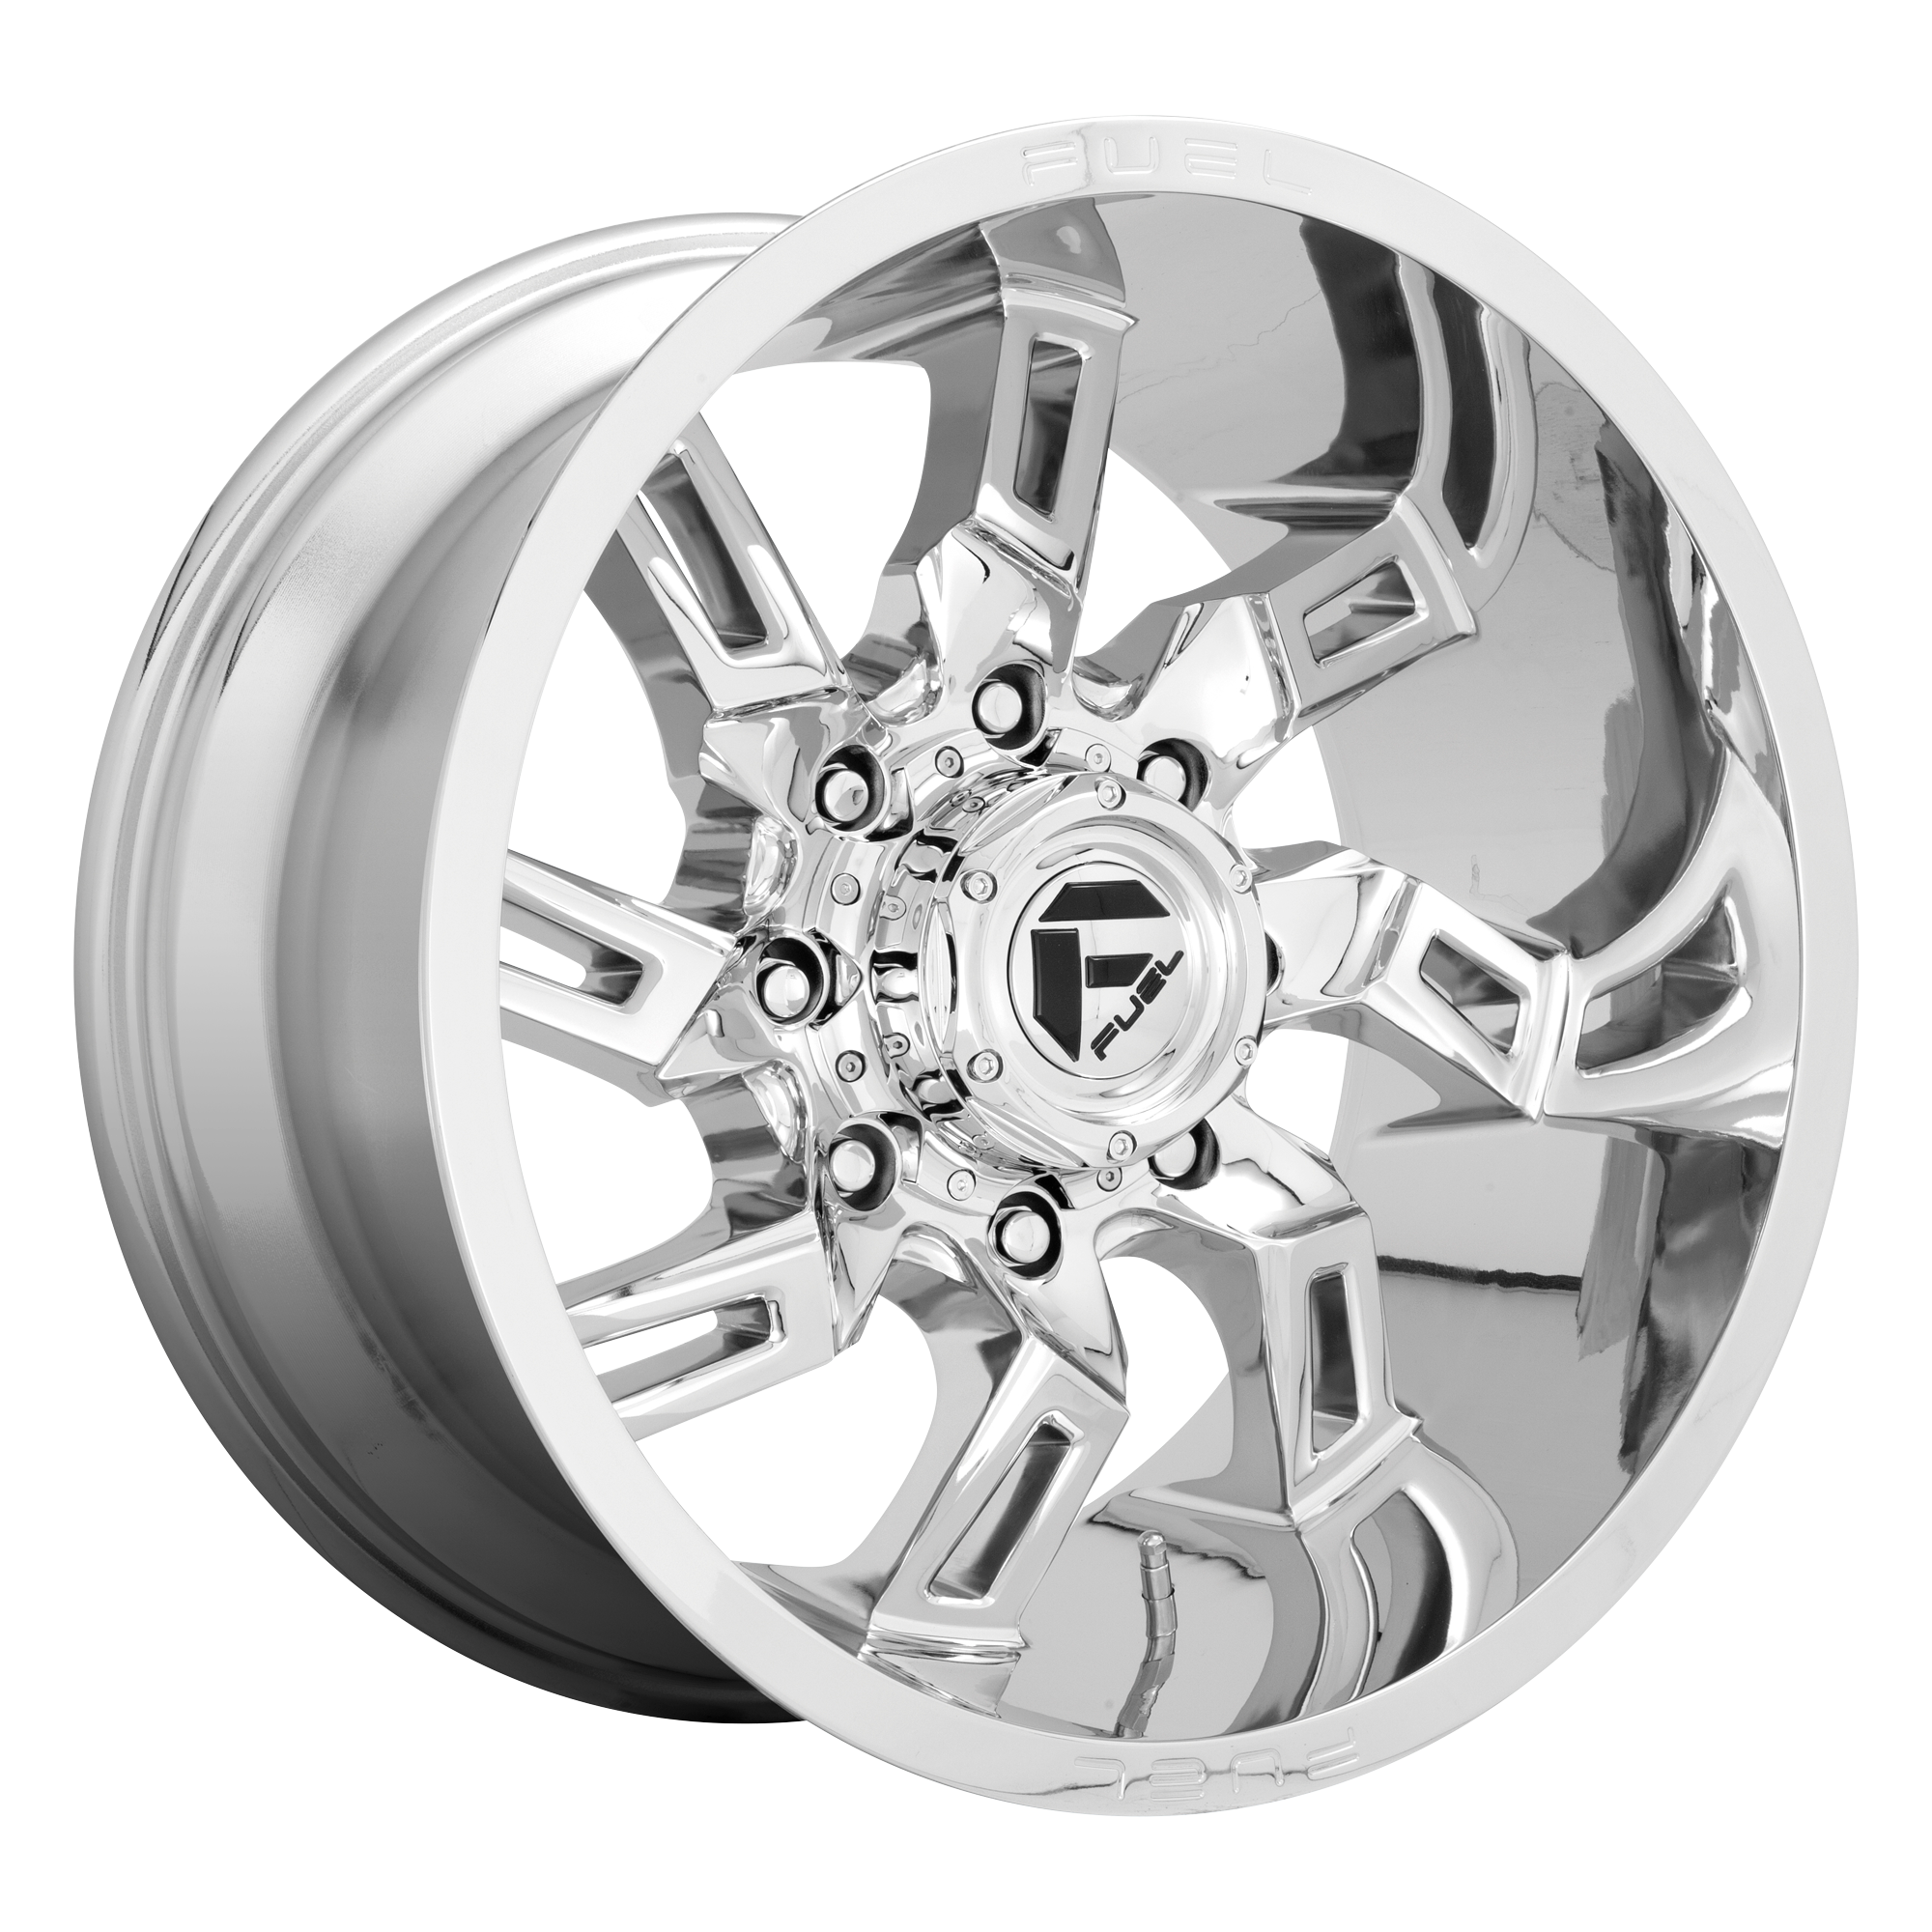 LOCKDOWN 20x10 6x135.00 CHROME (-18 mm) - Tires and Engine Performance